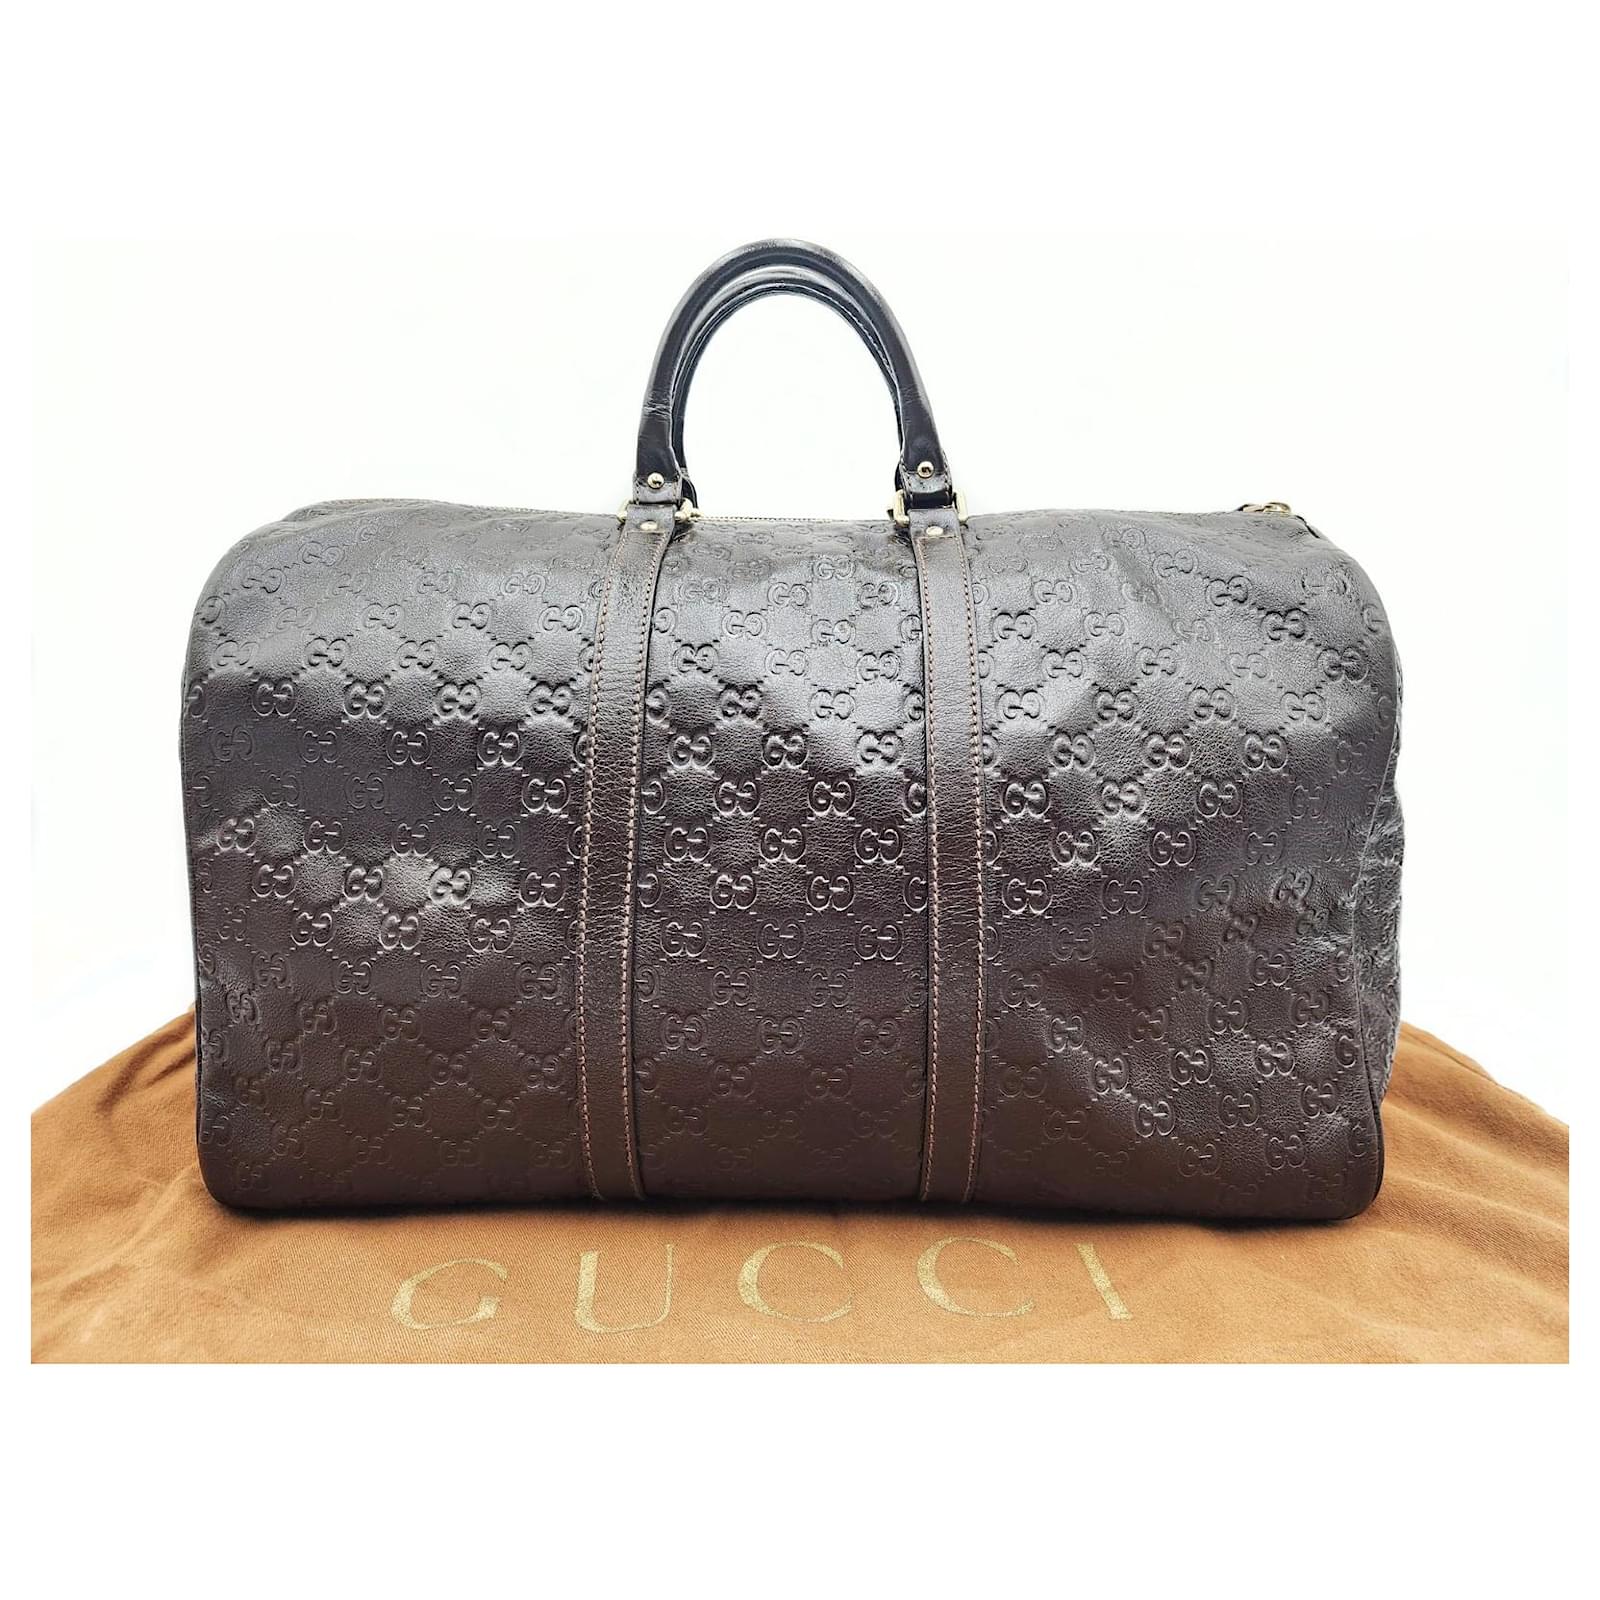 Gucci GG Carry-On Duffle Bag – Cettire